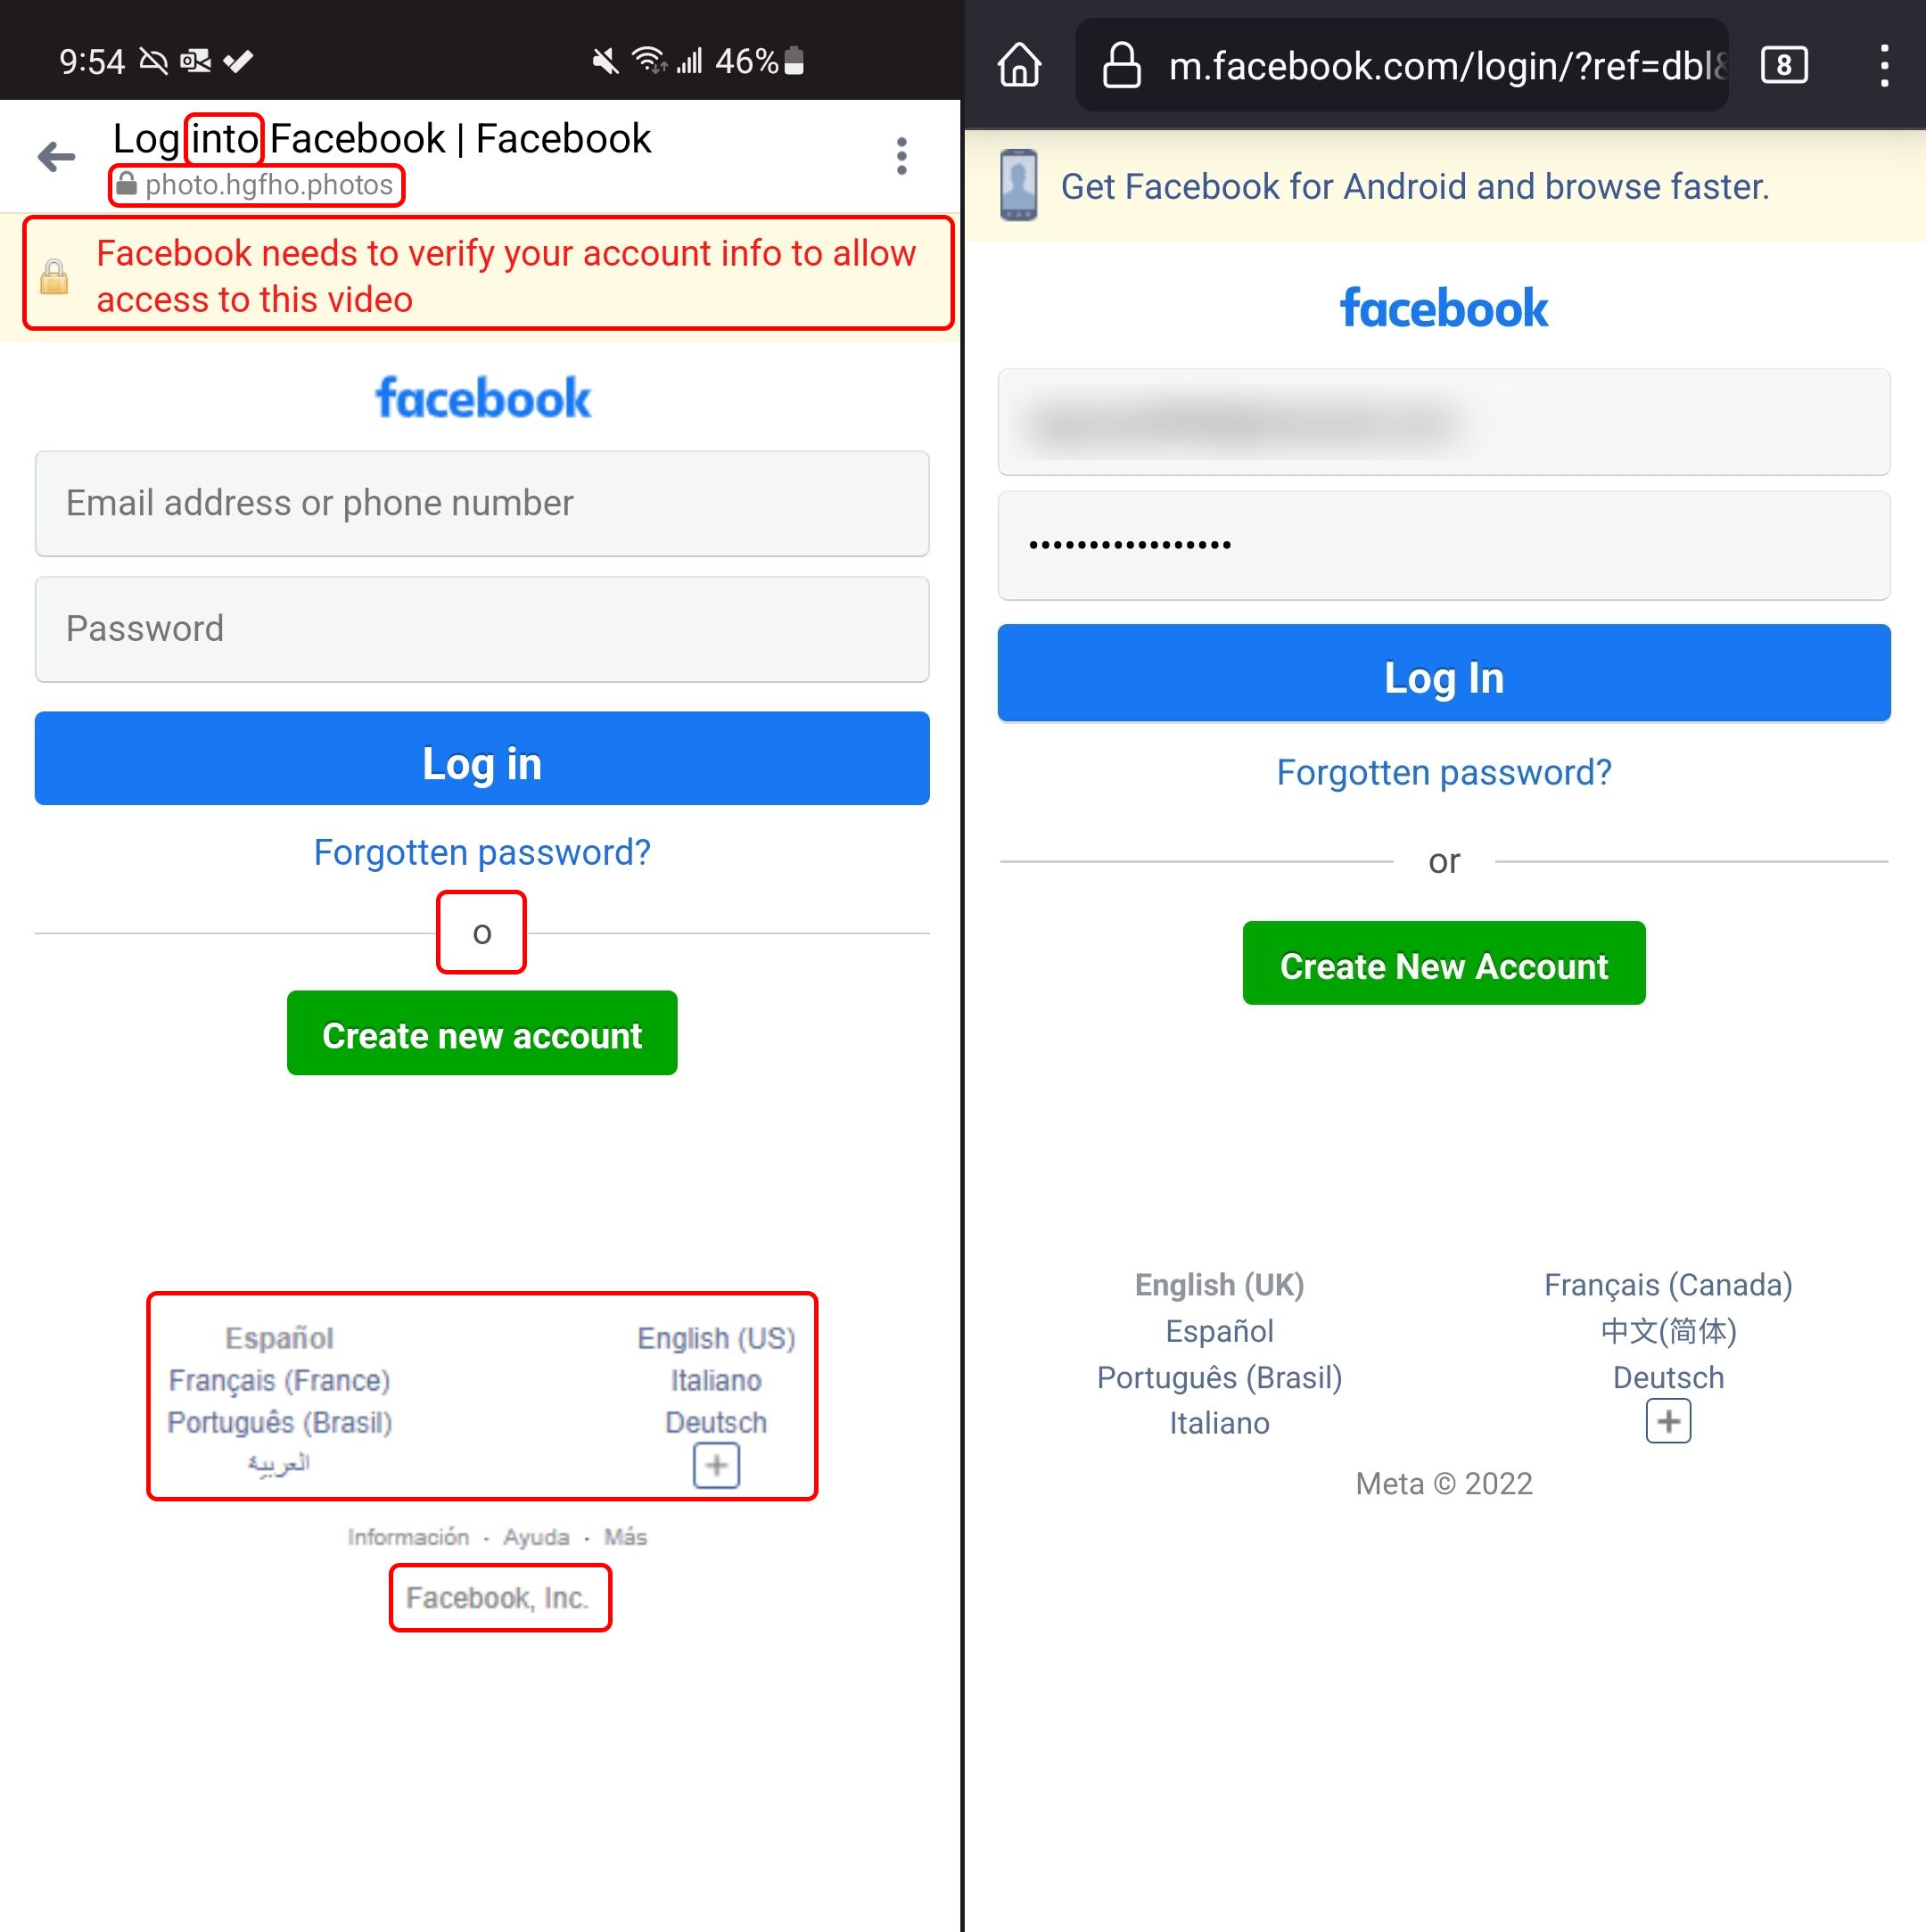 A fake Facebook Login page contrasted with the real one. In the fake page, a fake "we need to verify your account" message is displayed, the URL is not leading to Facebook, the page title and dividor contain spelling errors, the language settings are incorrect for the user, the autofill information is missing, and the footer contains the wrong company name..